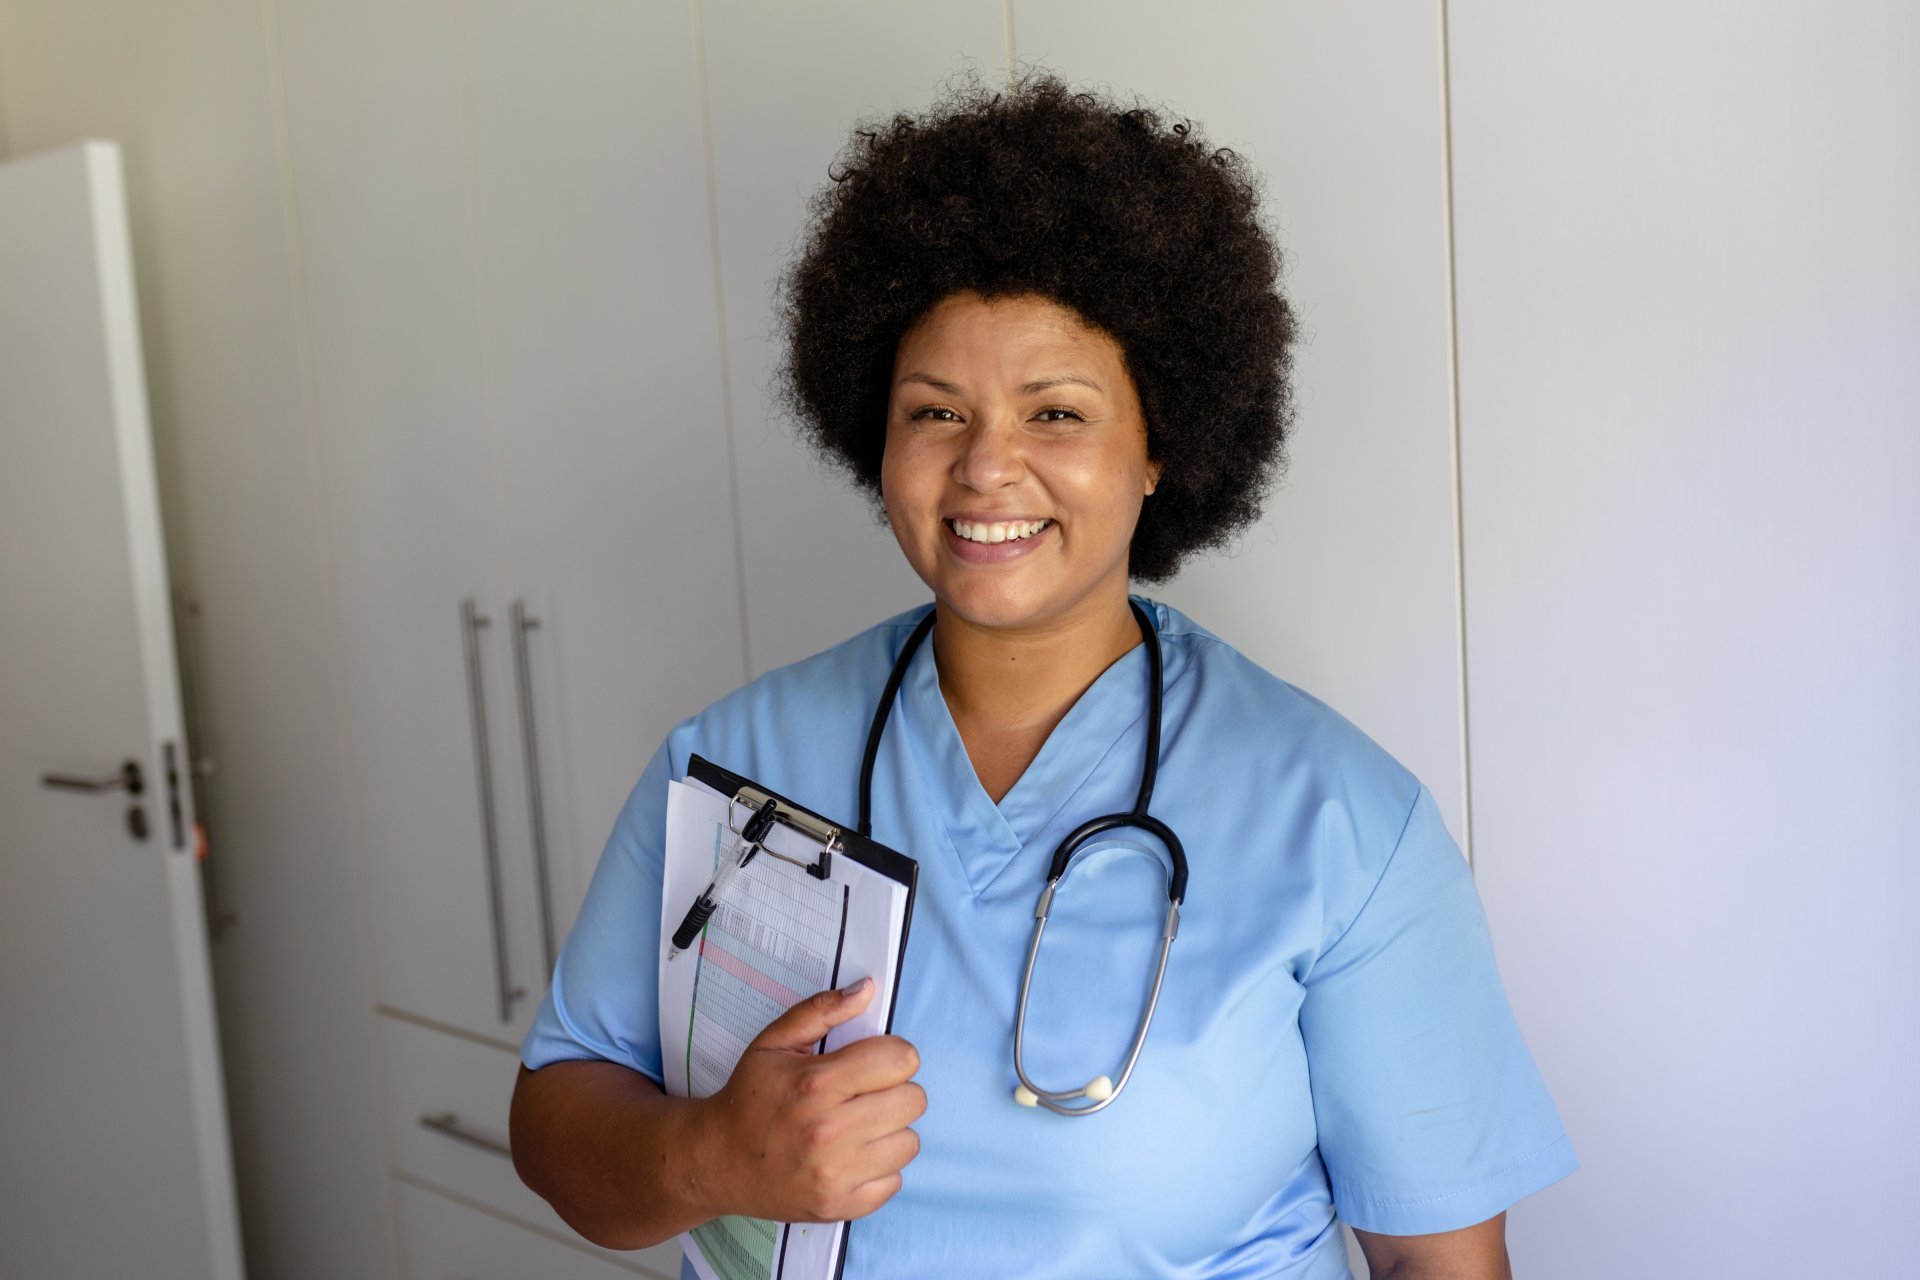 A smiling female clinician with a stethoscope holds a clipboard.